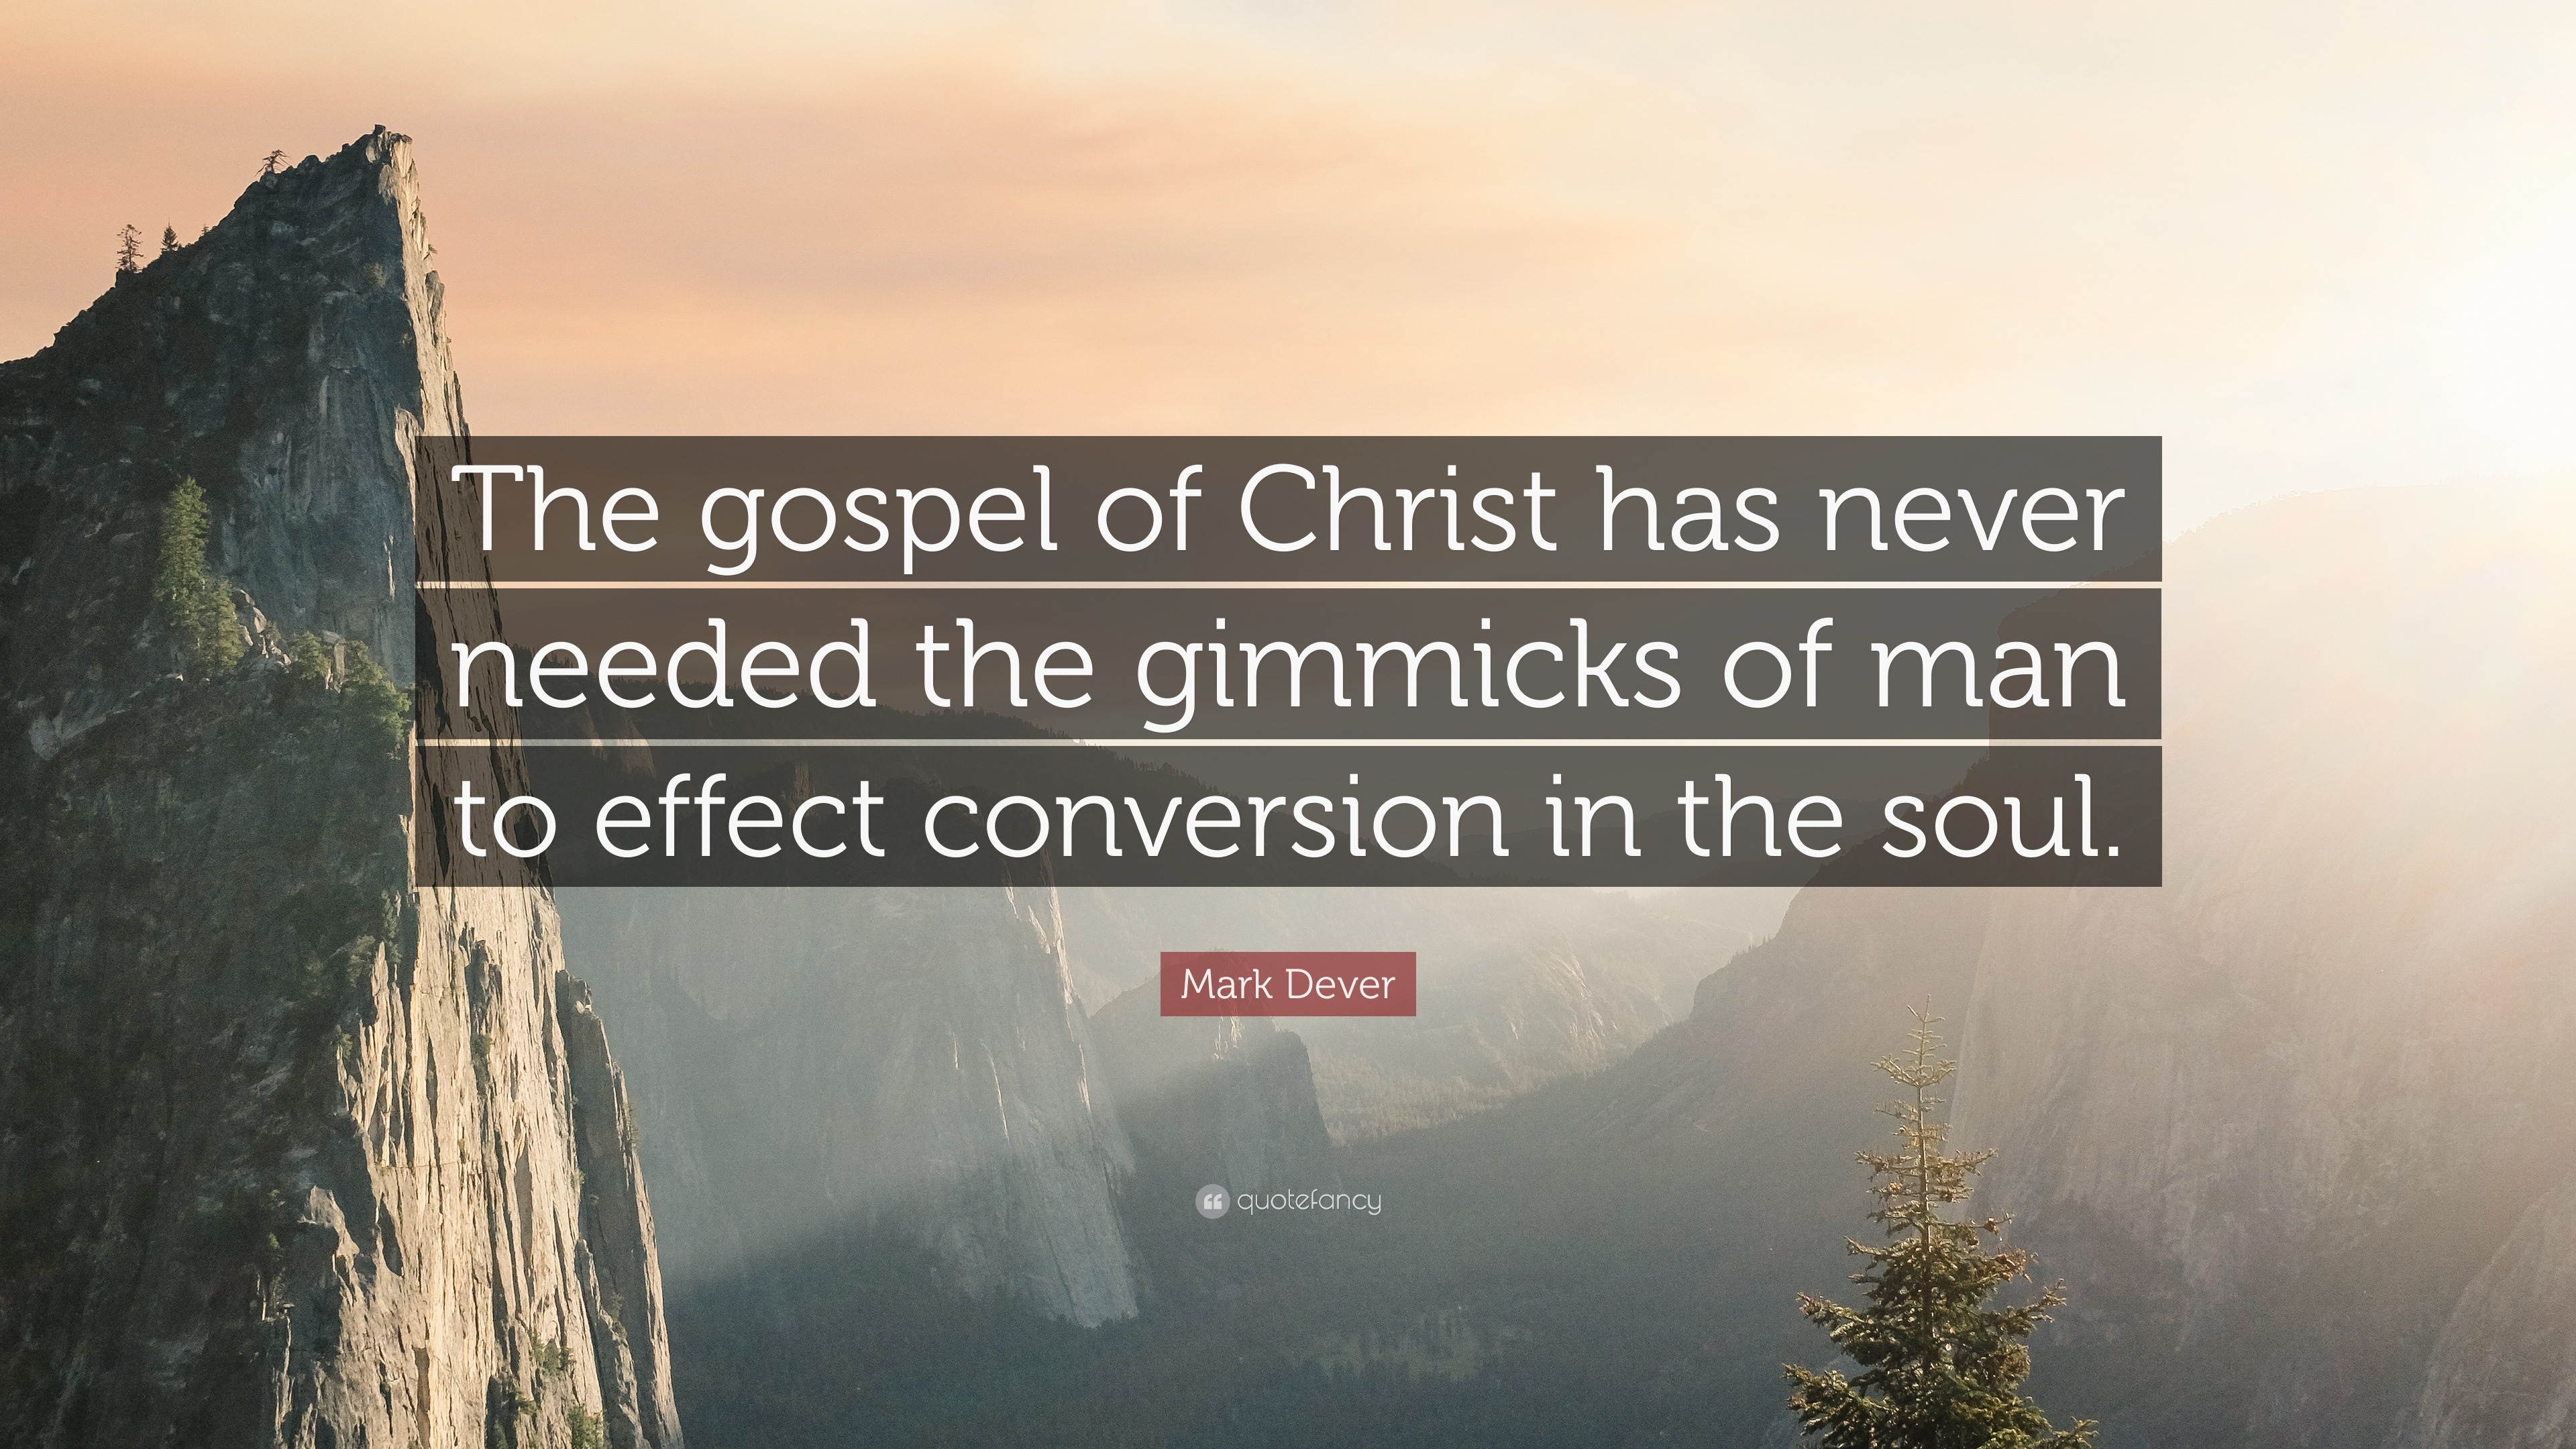 Mark Dever Quote: “The gospel of Christ has never needed the gimmicks ...